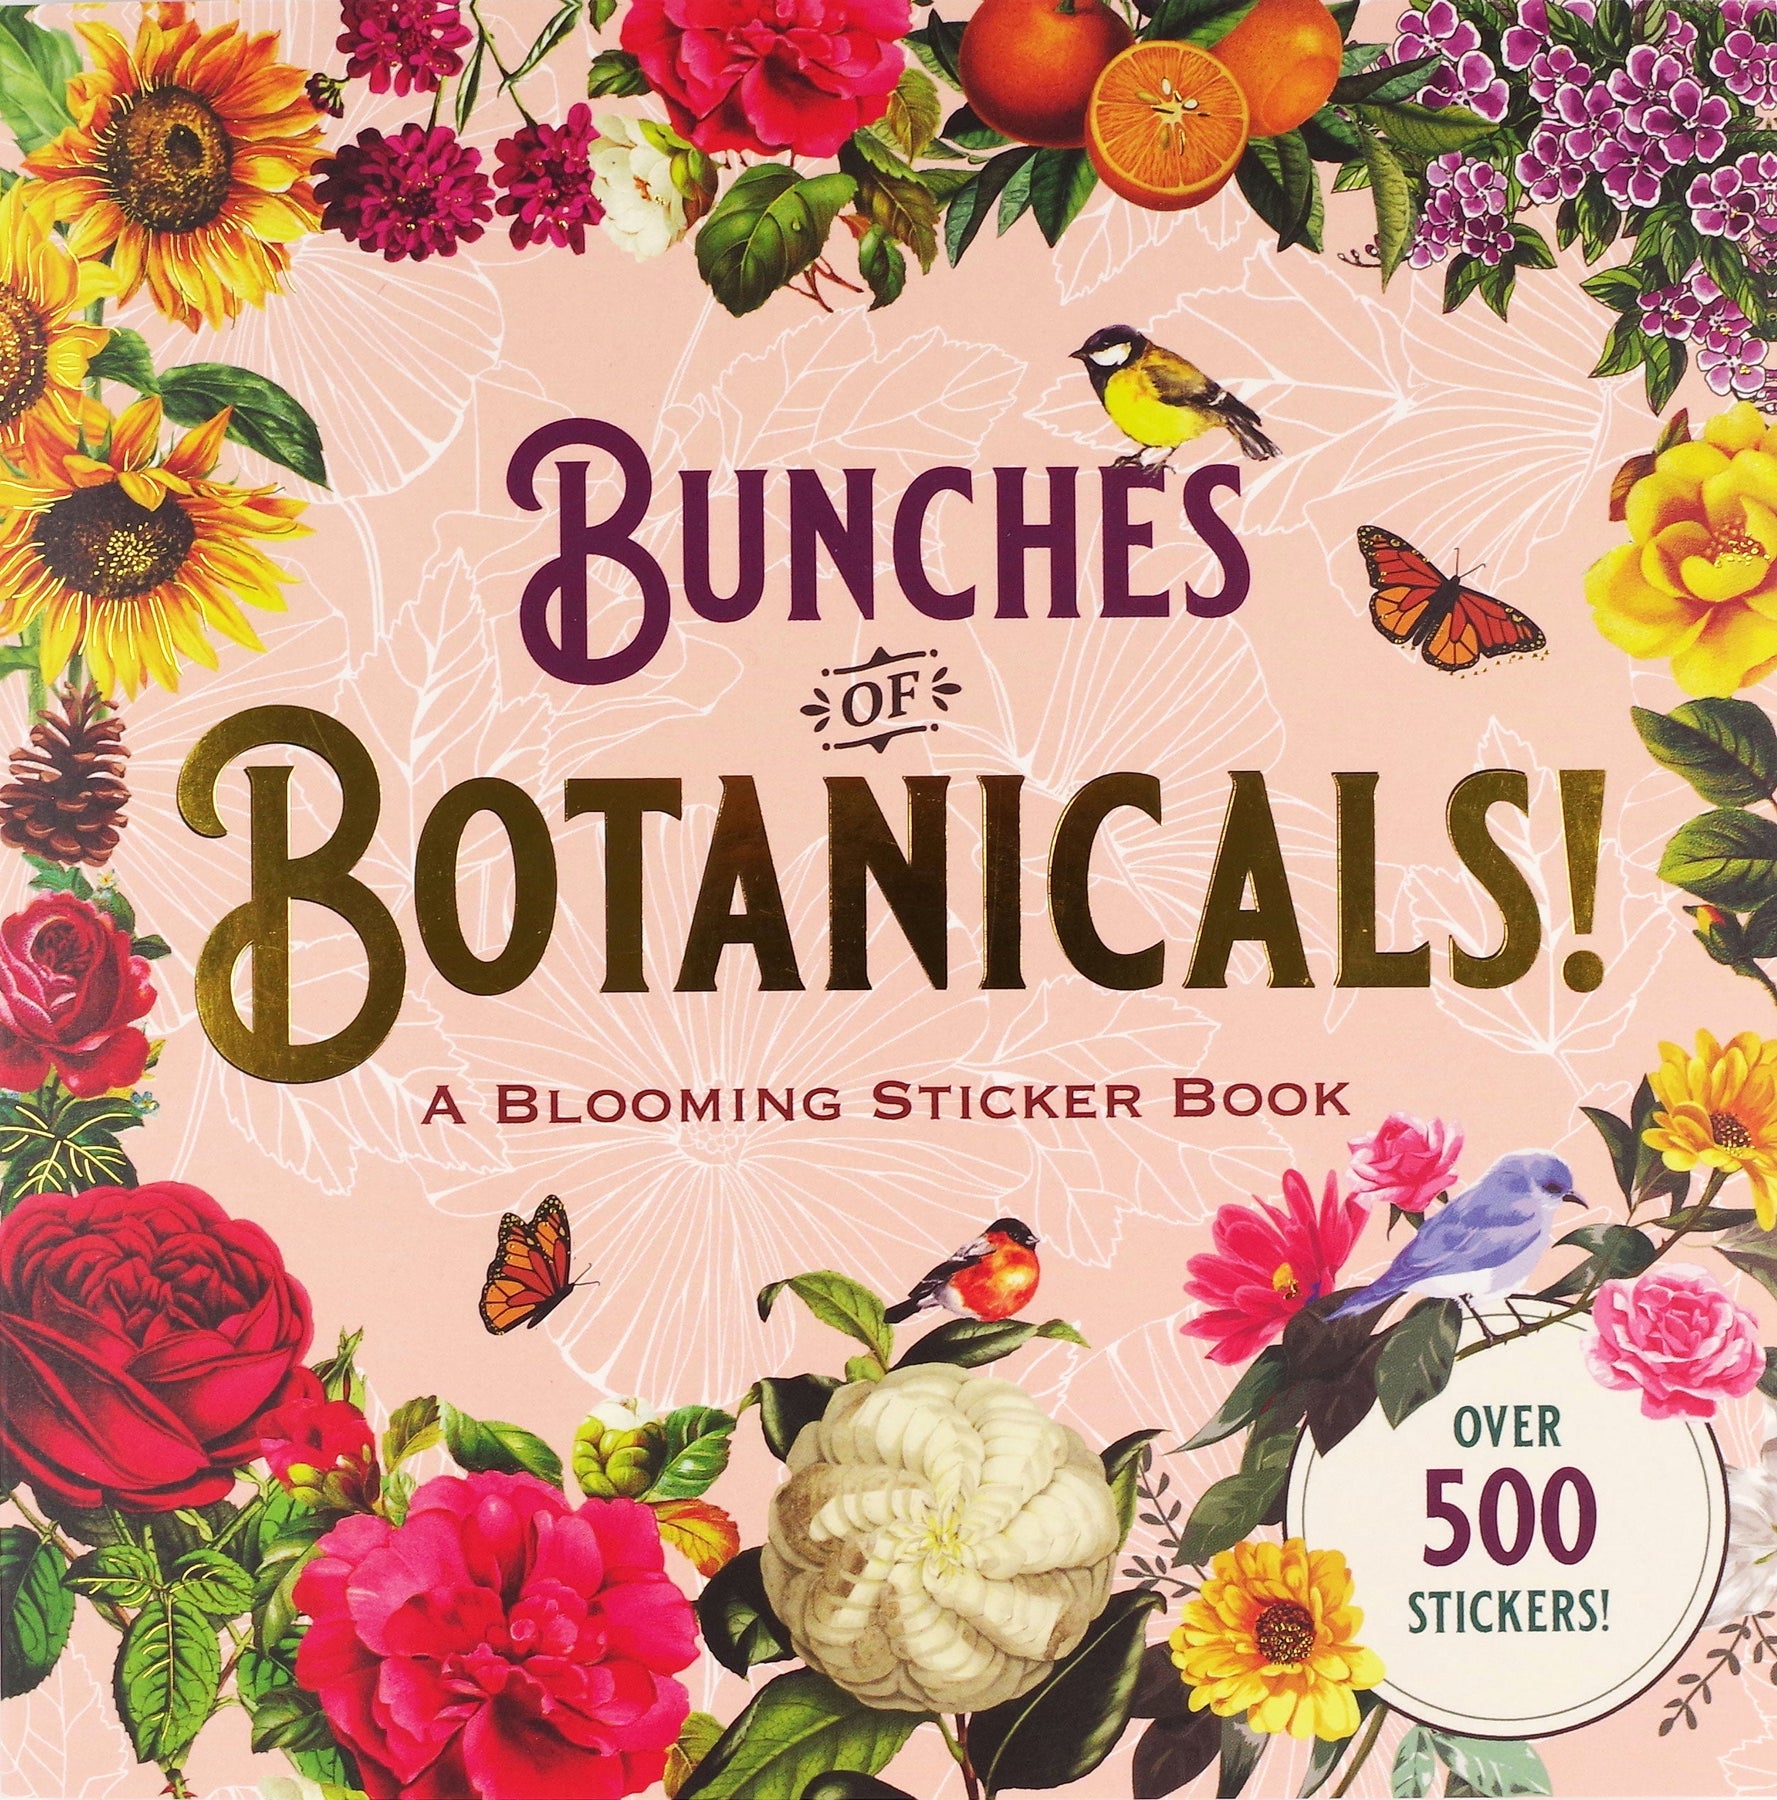 Bunches of Botanicals: A Blooming Sticker Book (Over 500+ Stickers!)